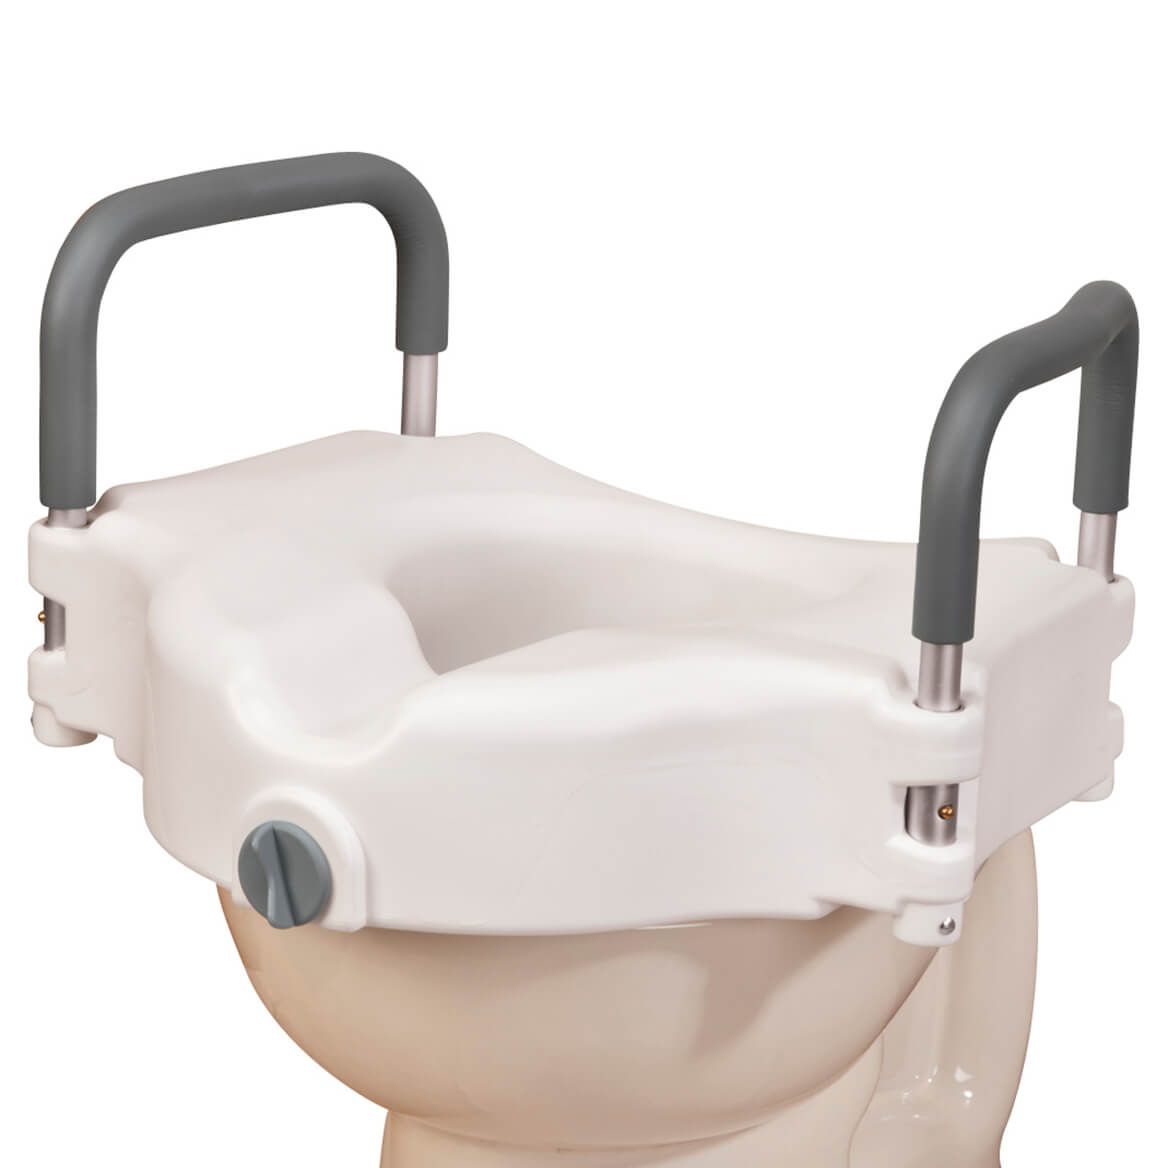 Locking Raised Toilet Seat with Arms           XL + '-' + 344447